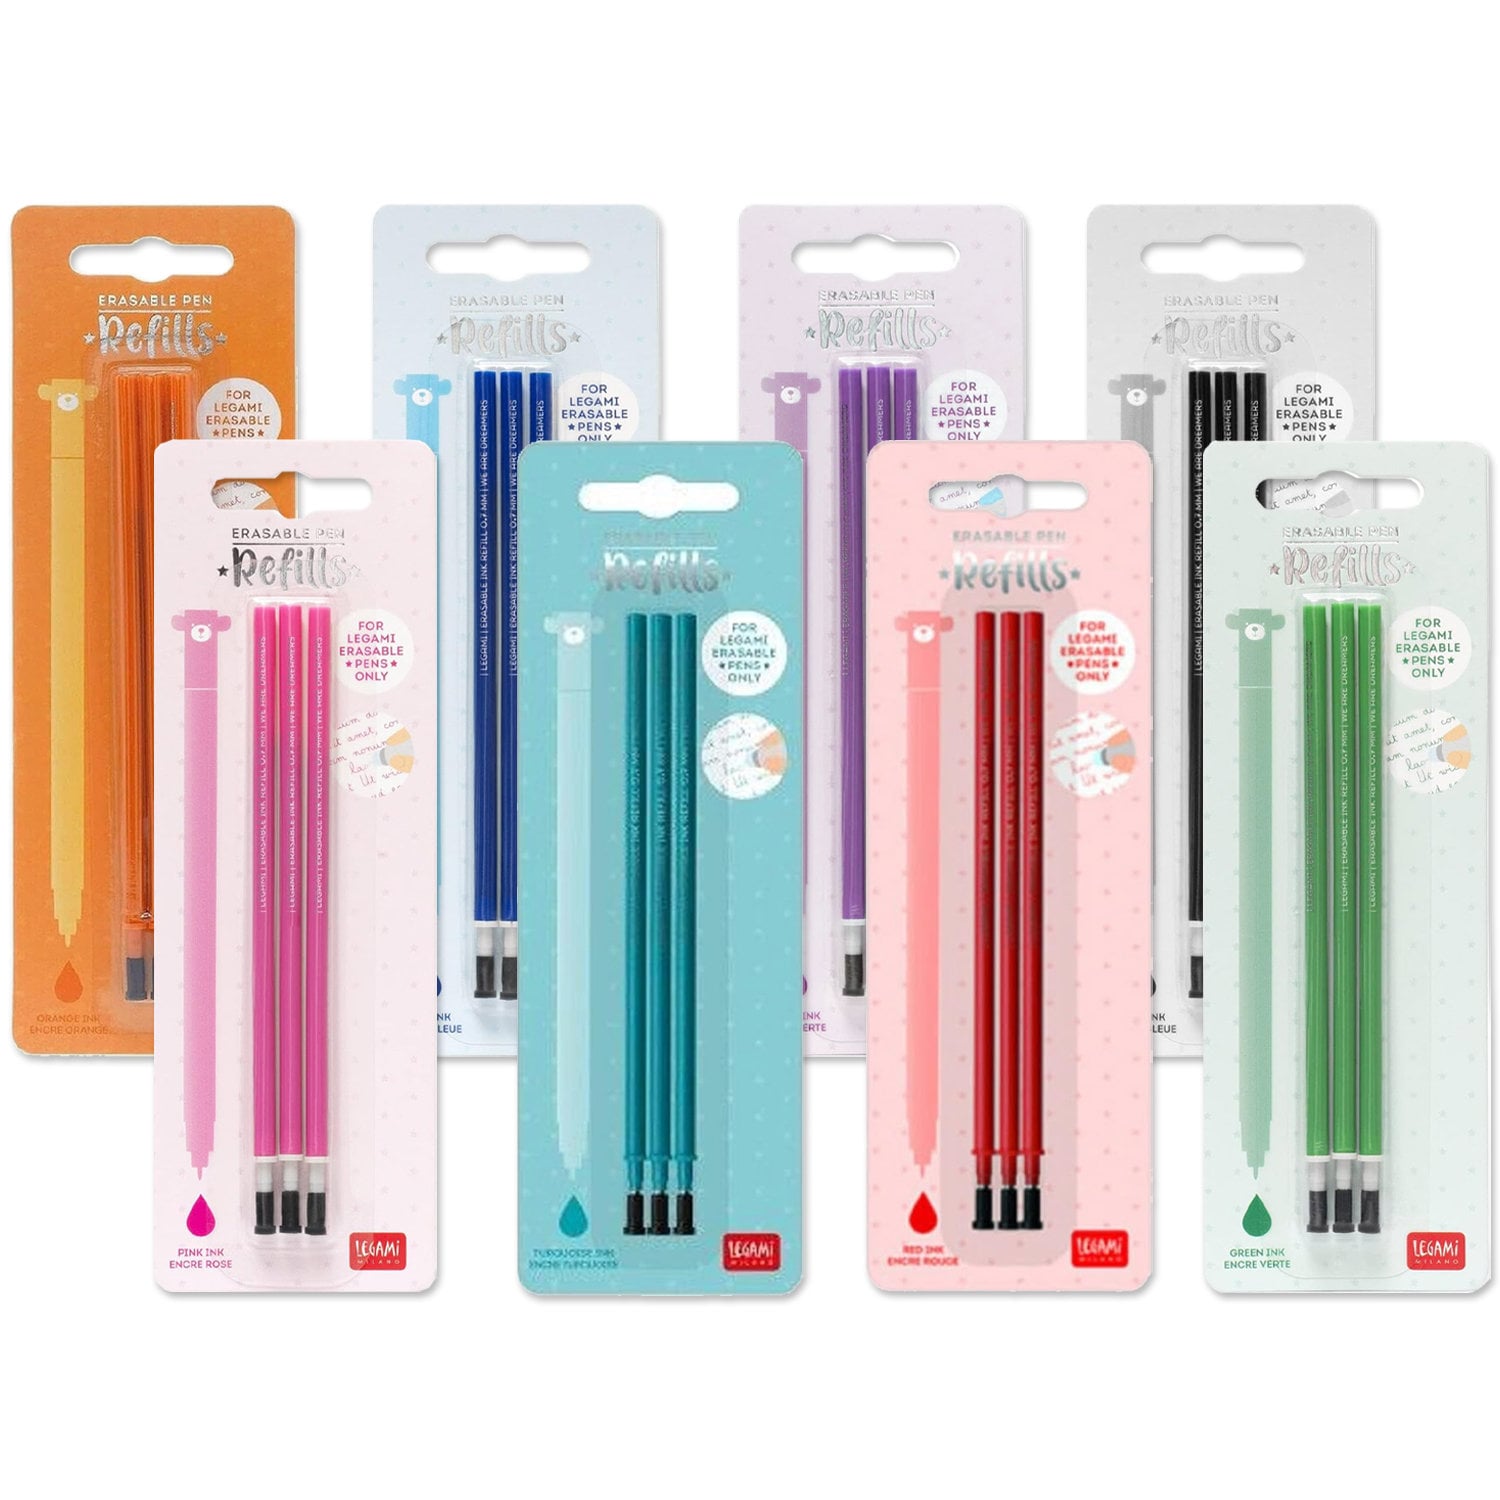 Legami Refill for Erasable Gel Pen Sets of 3 13cm Thermosensitive Ink  Black, Blue, Red, Green, Purple or Turquoise Colours -  Ireland